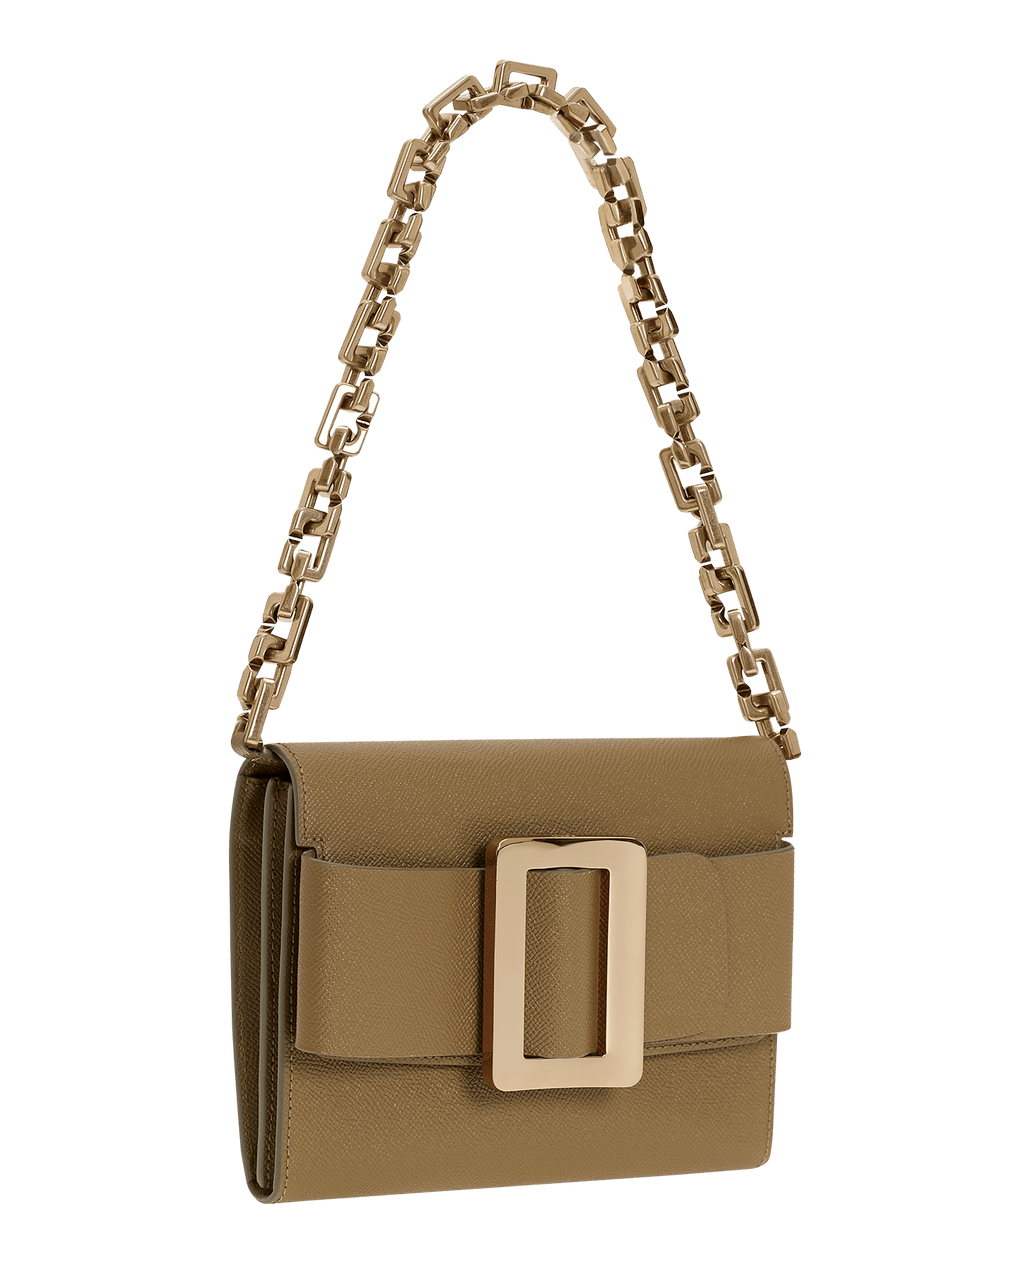 Rectangular clutch purse in grained brown leather with oversized gold buckle, leather belt, front flap closure, and metal chain carrying strap.